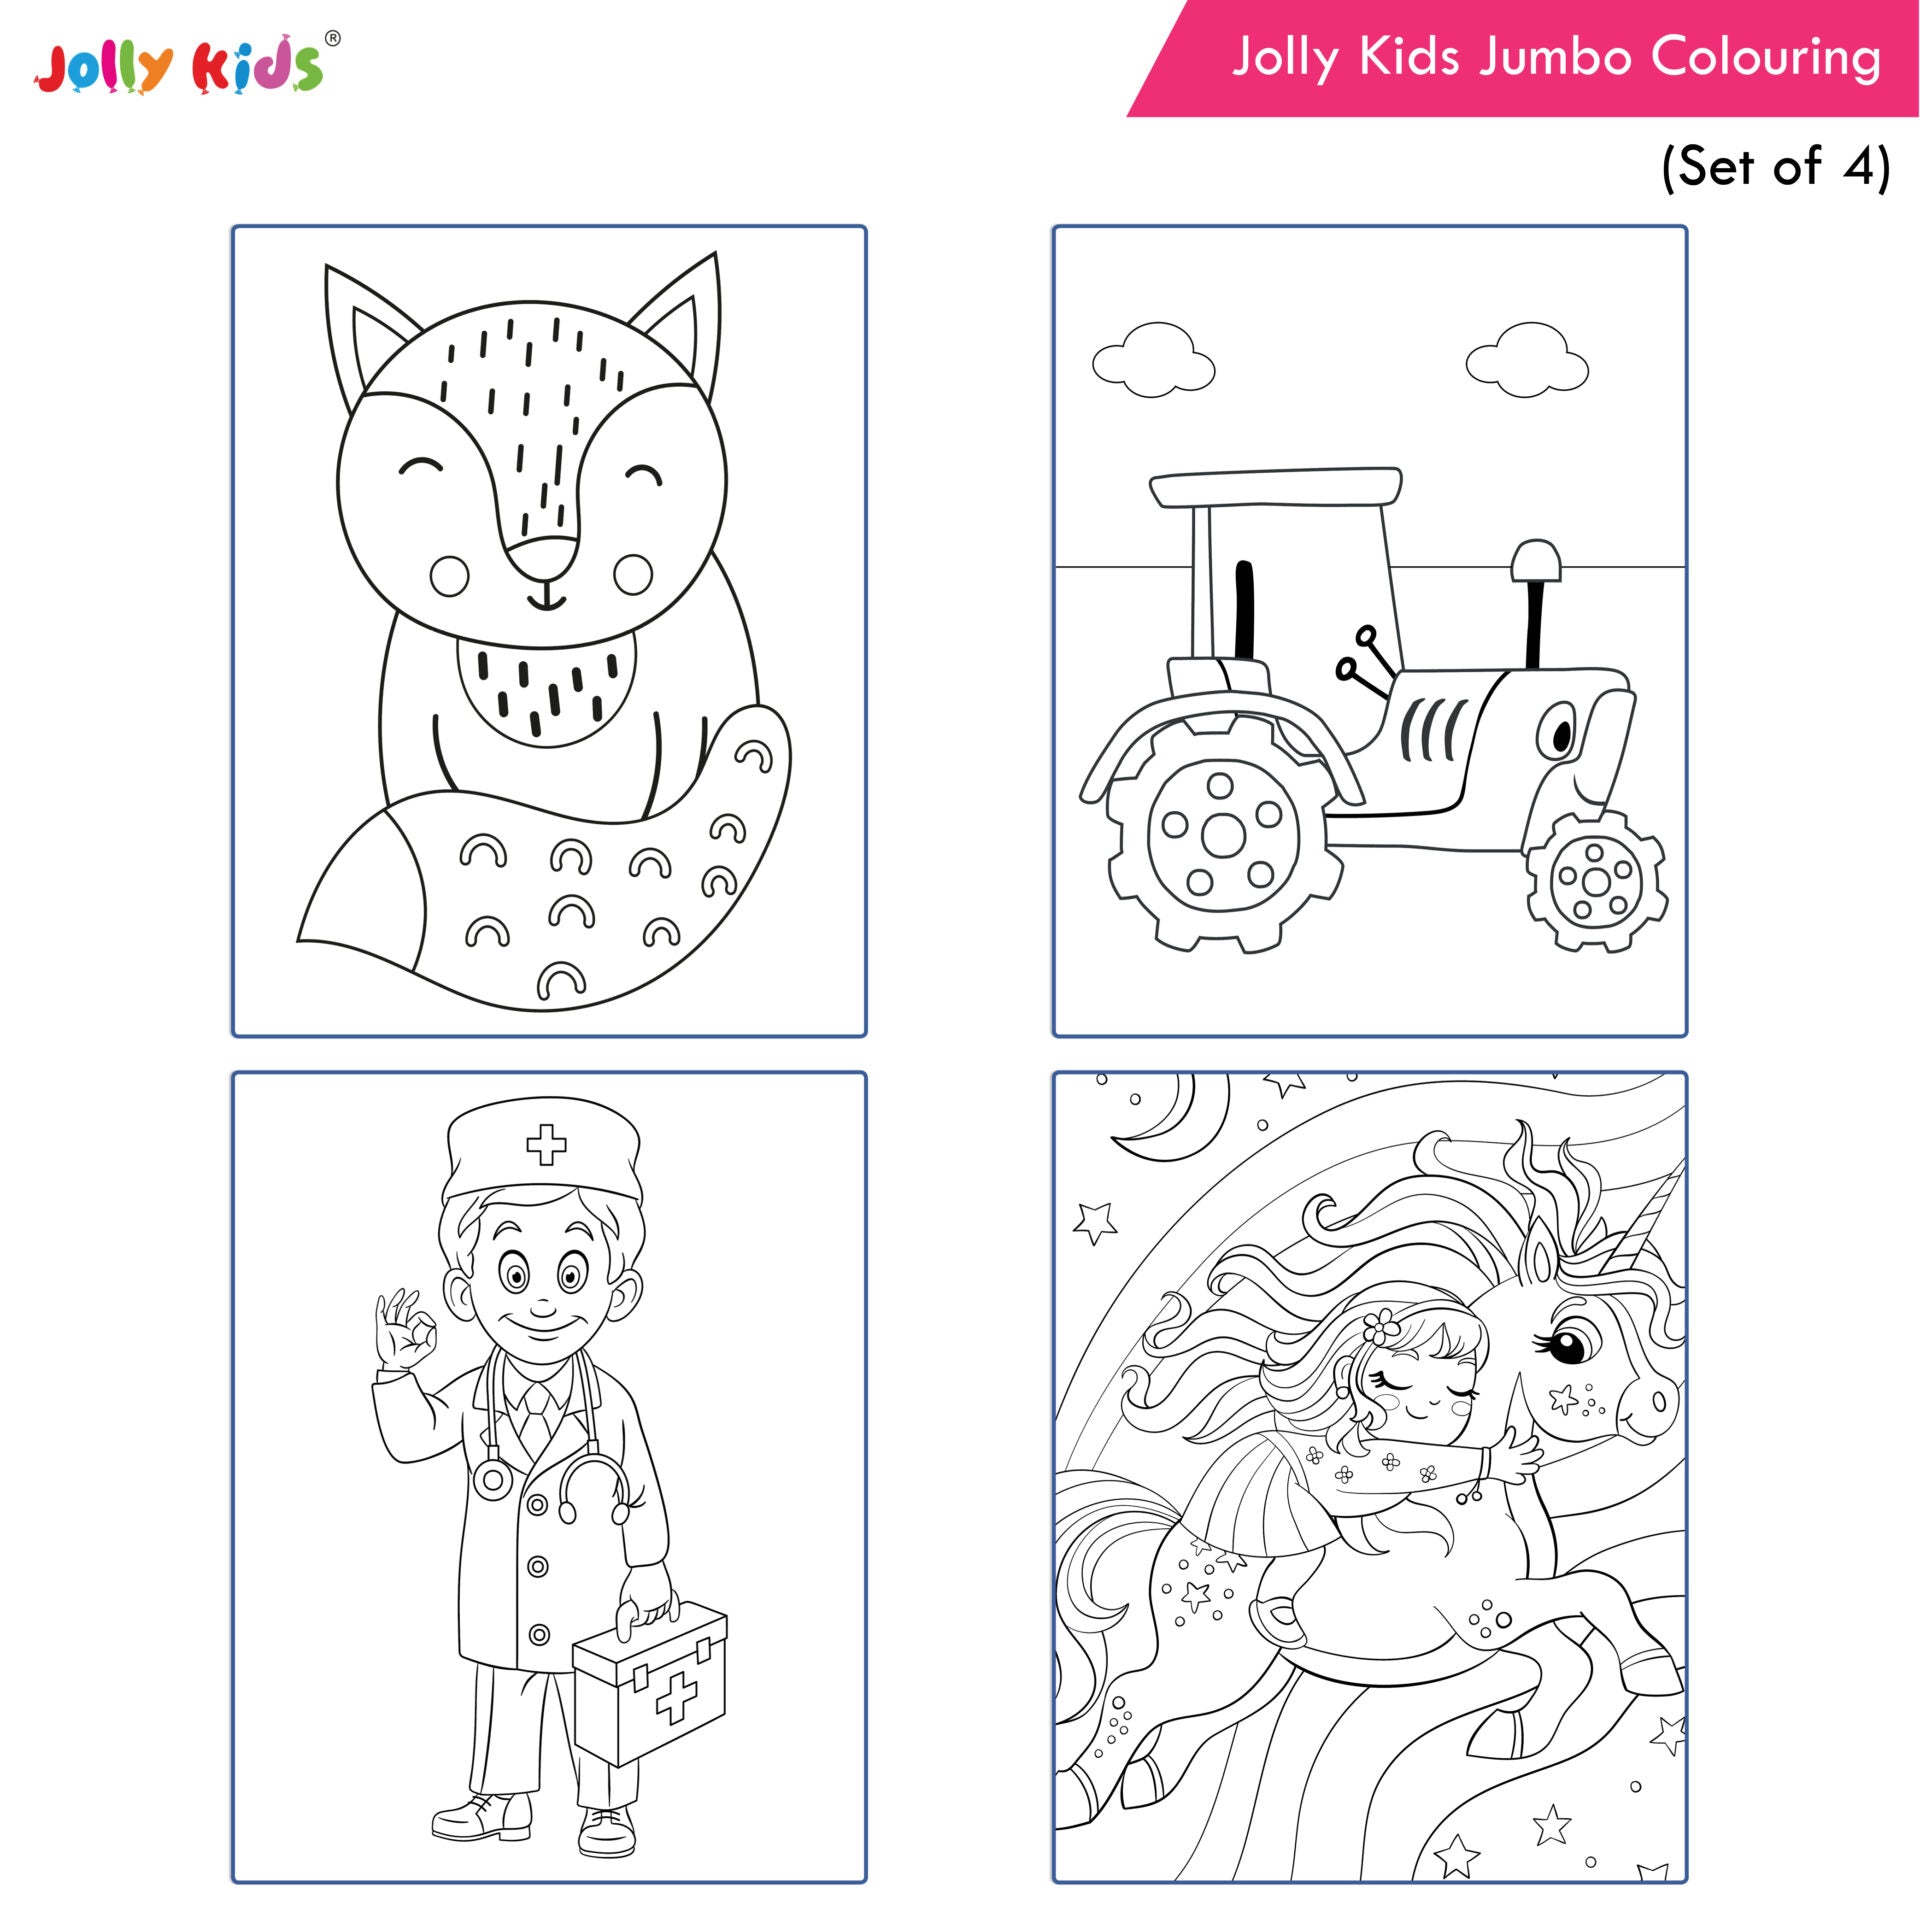 Jolly Kids Colouring for Fun Books A, Set of 4